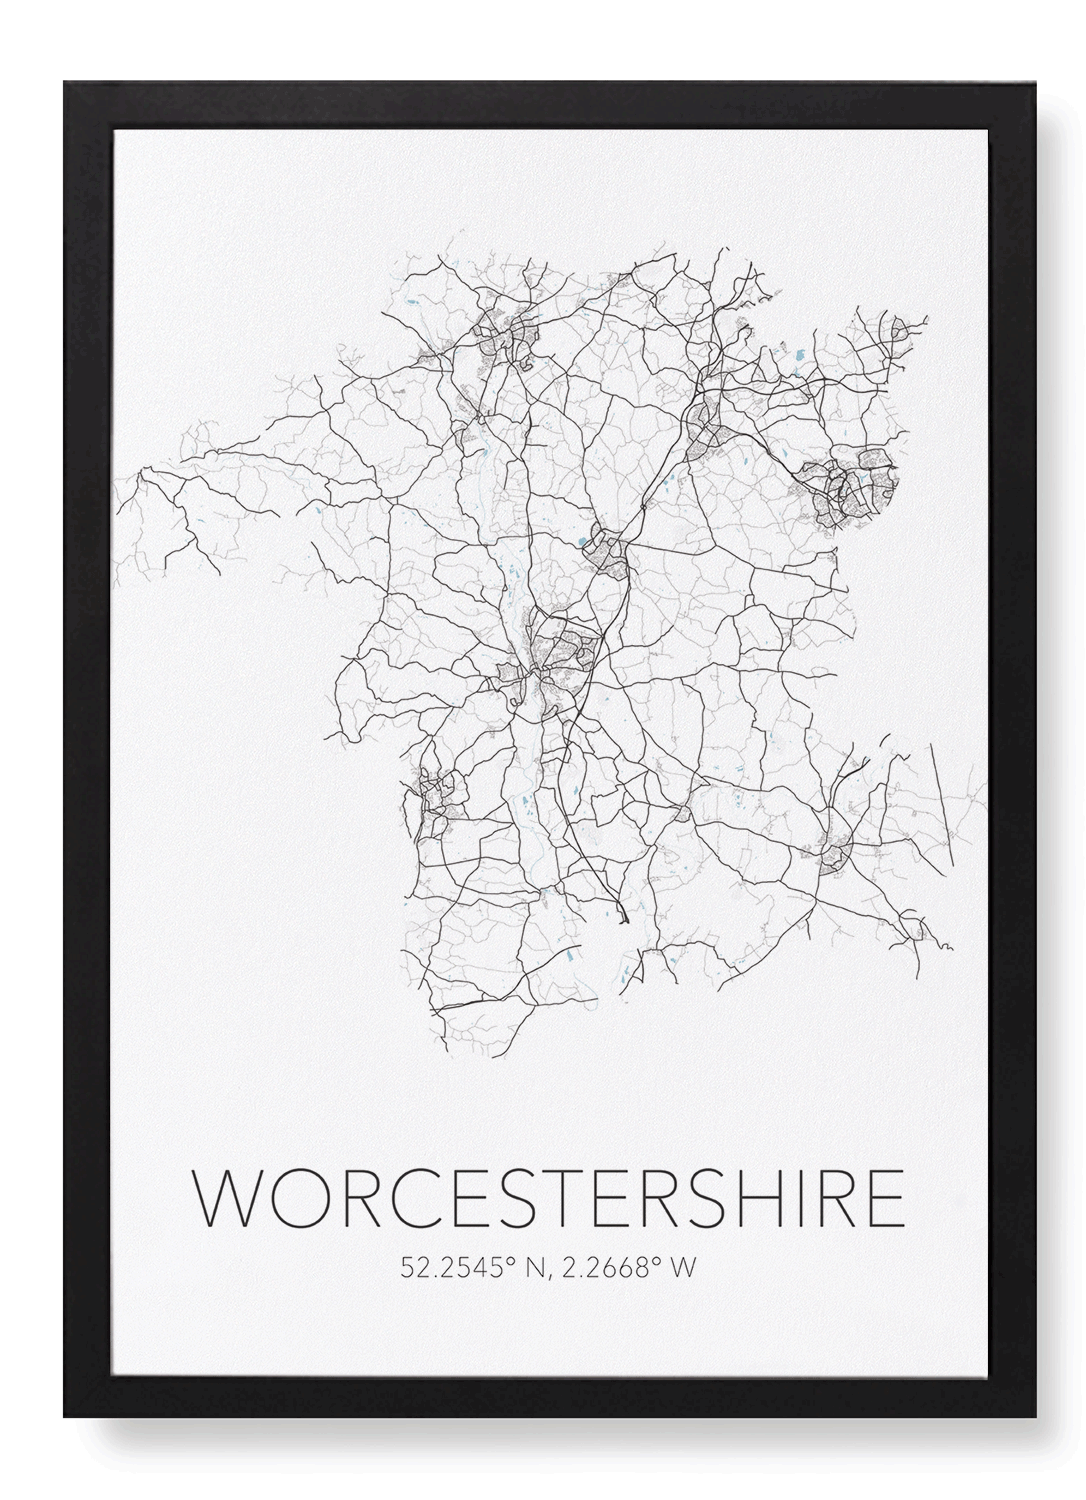 WORCESTERSHIRE CUTOUT